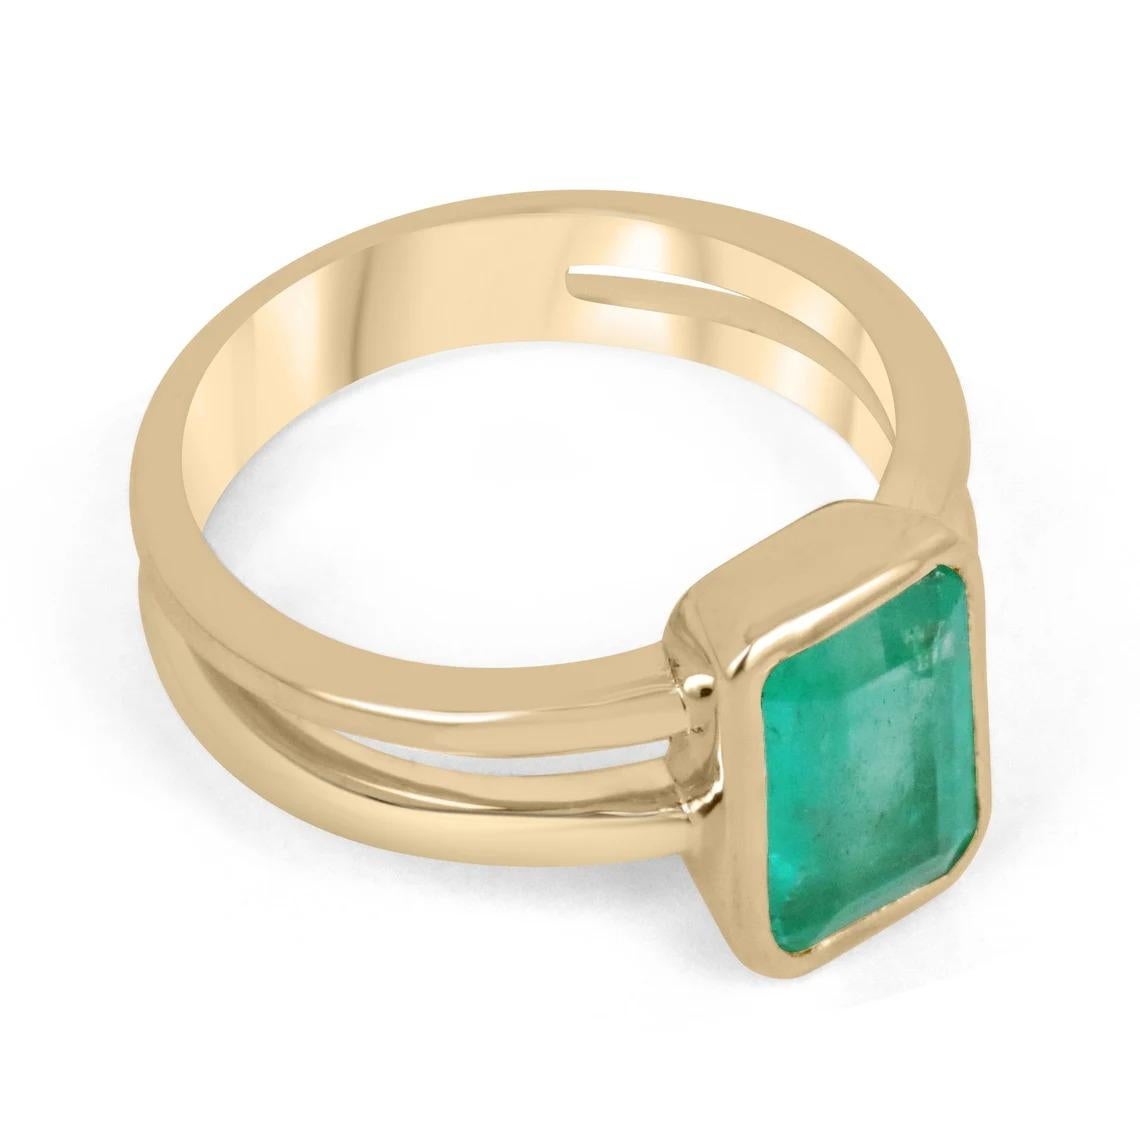 Displayed is a stunning emerald solitaire engagement or right-hand ring in 14K yellow gold. This gorgeous solitaire ring carries a gorgeous 2.05-carat emerald in a bezel setting. Fully faceted, this gemstone showcases excellent shine and beautiful,